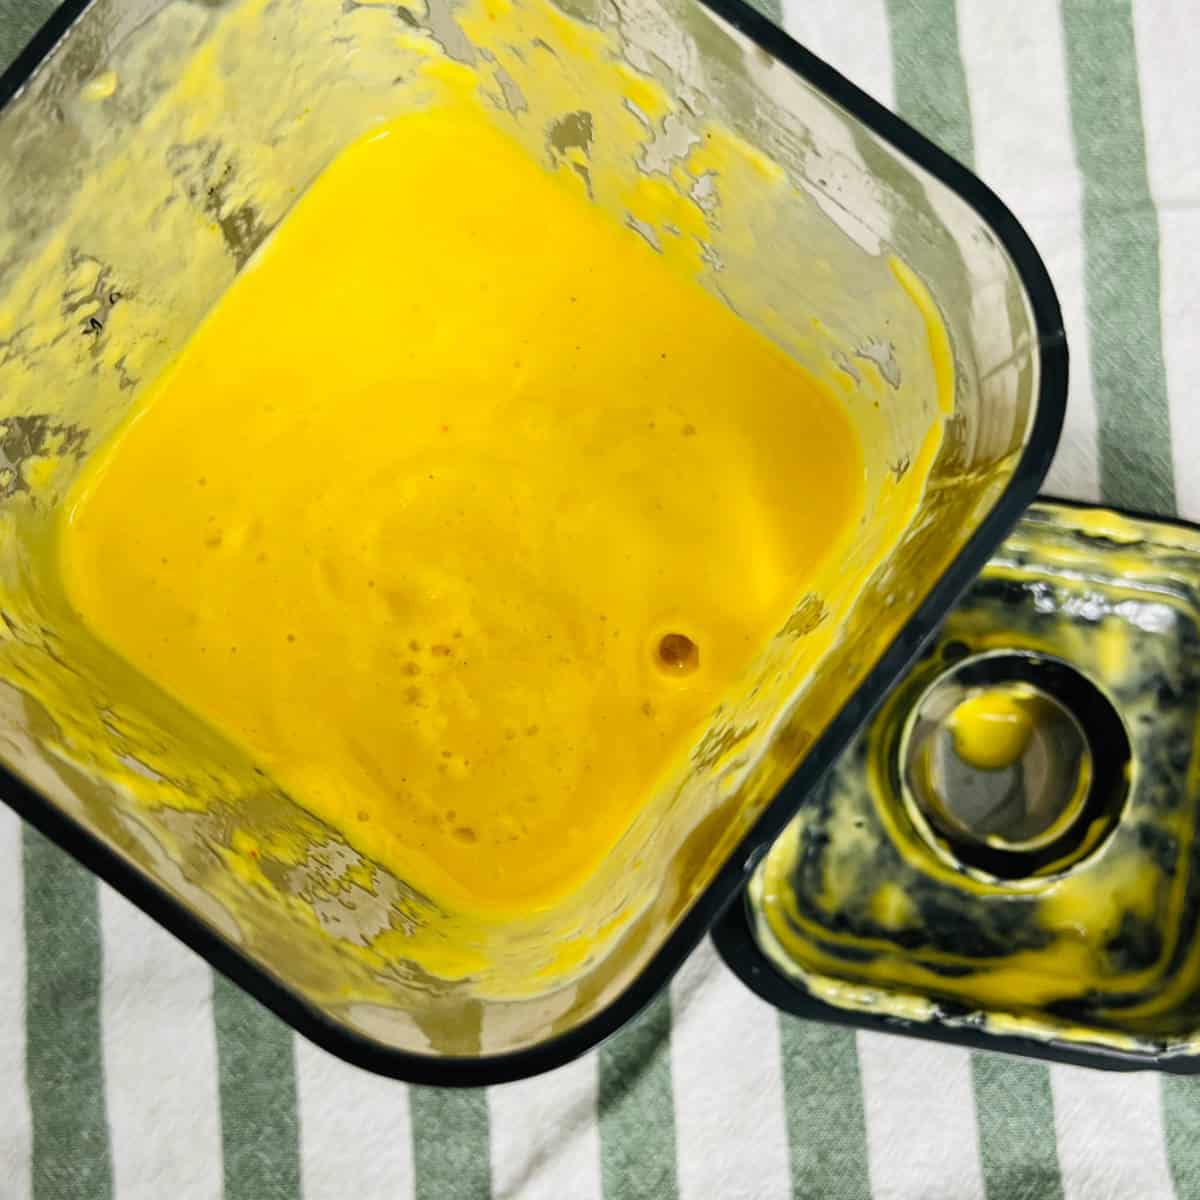 blend into smooth puree.